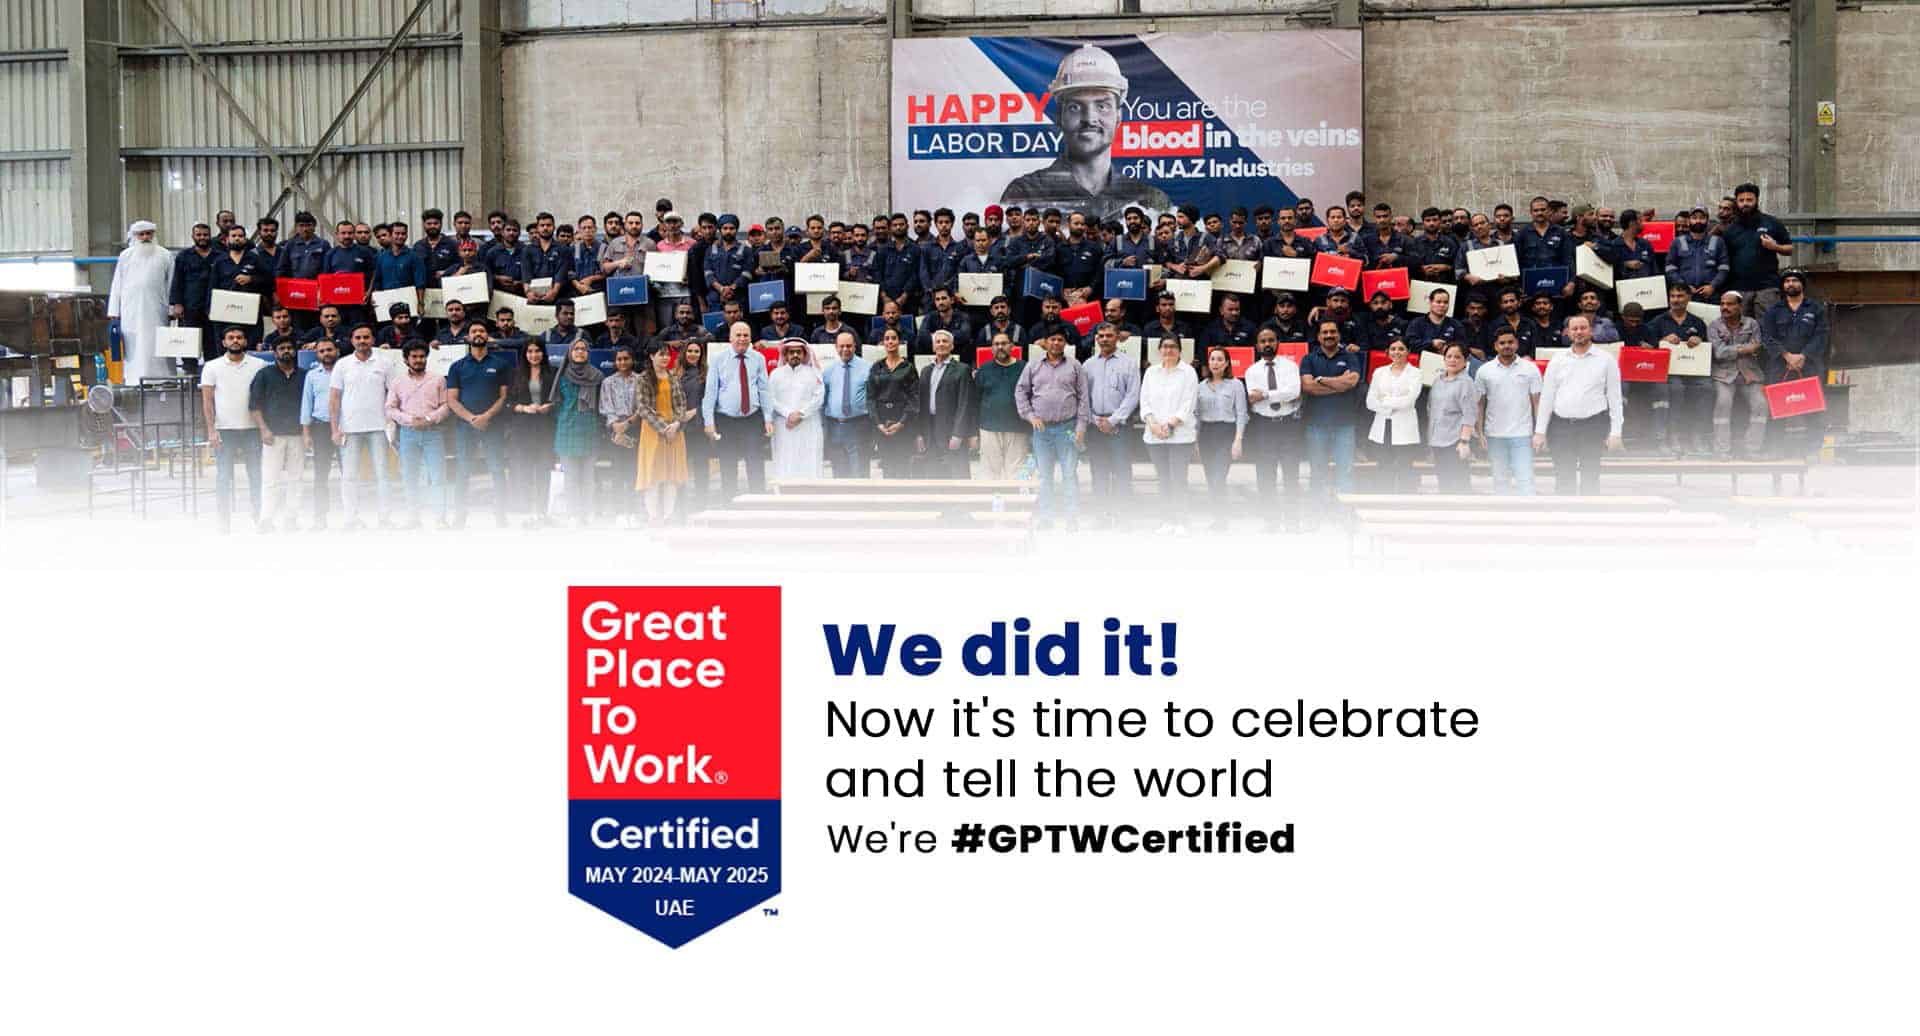 NAZ Industries has been recognized as a Great Place to Work